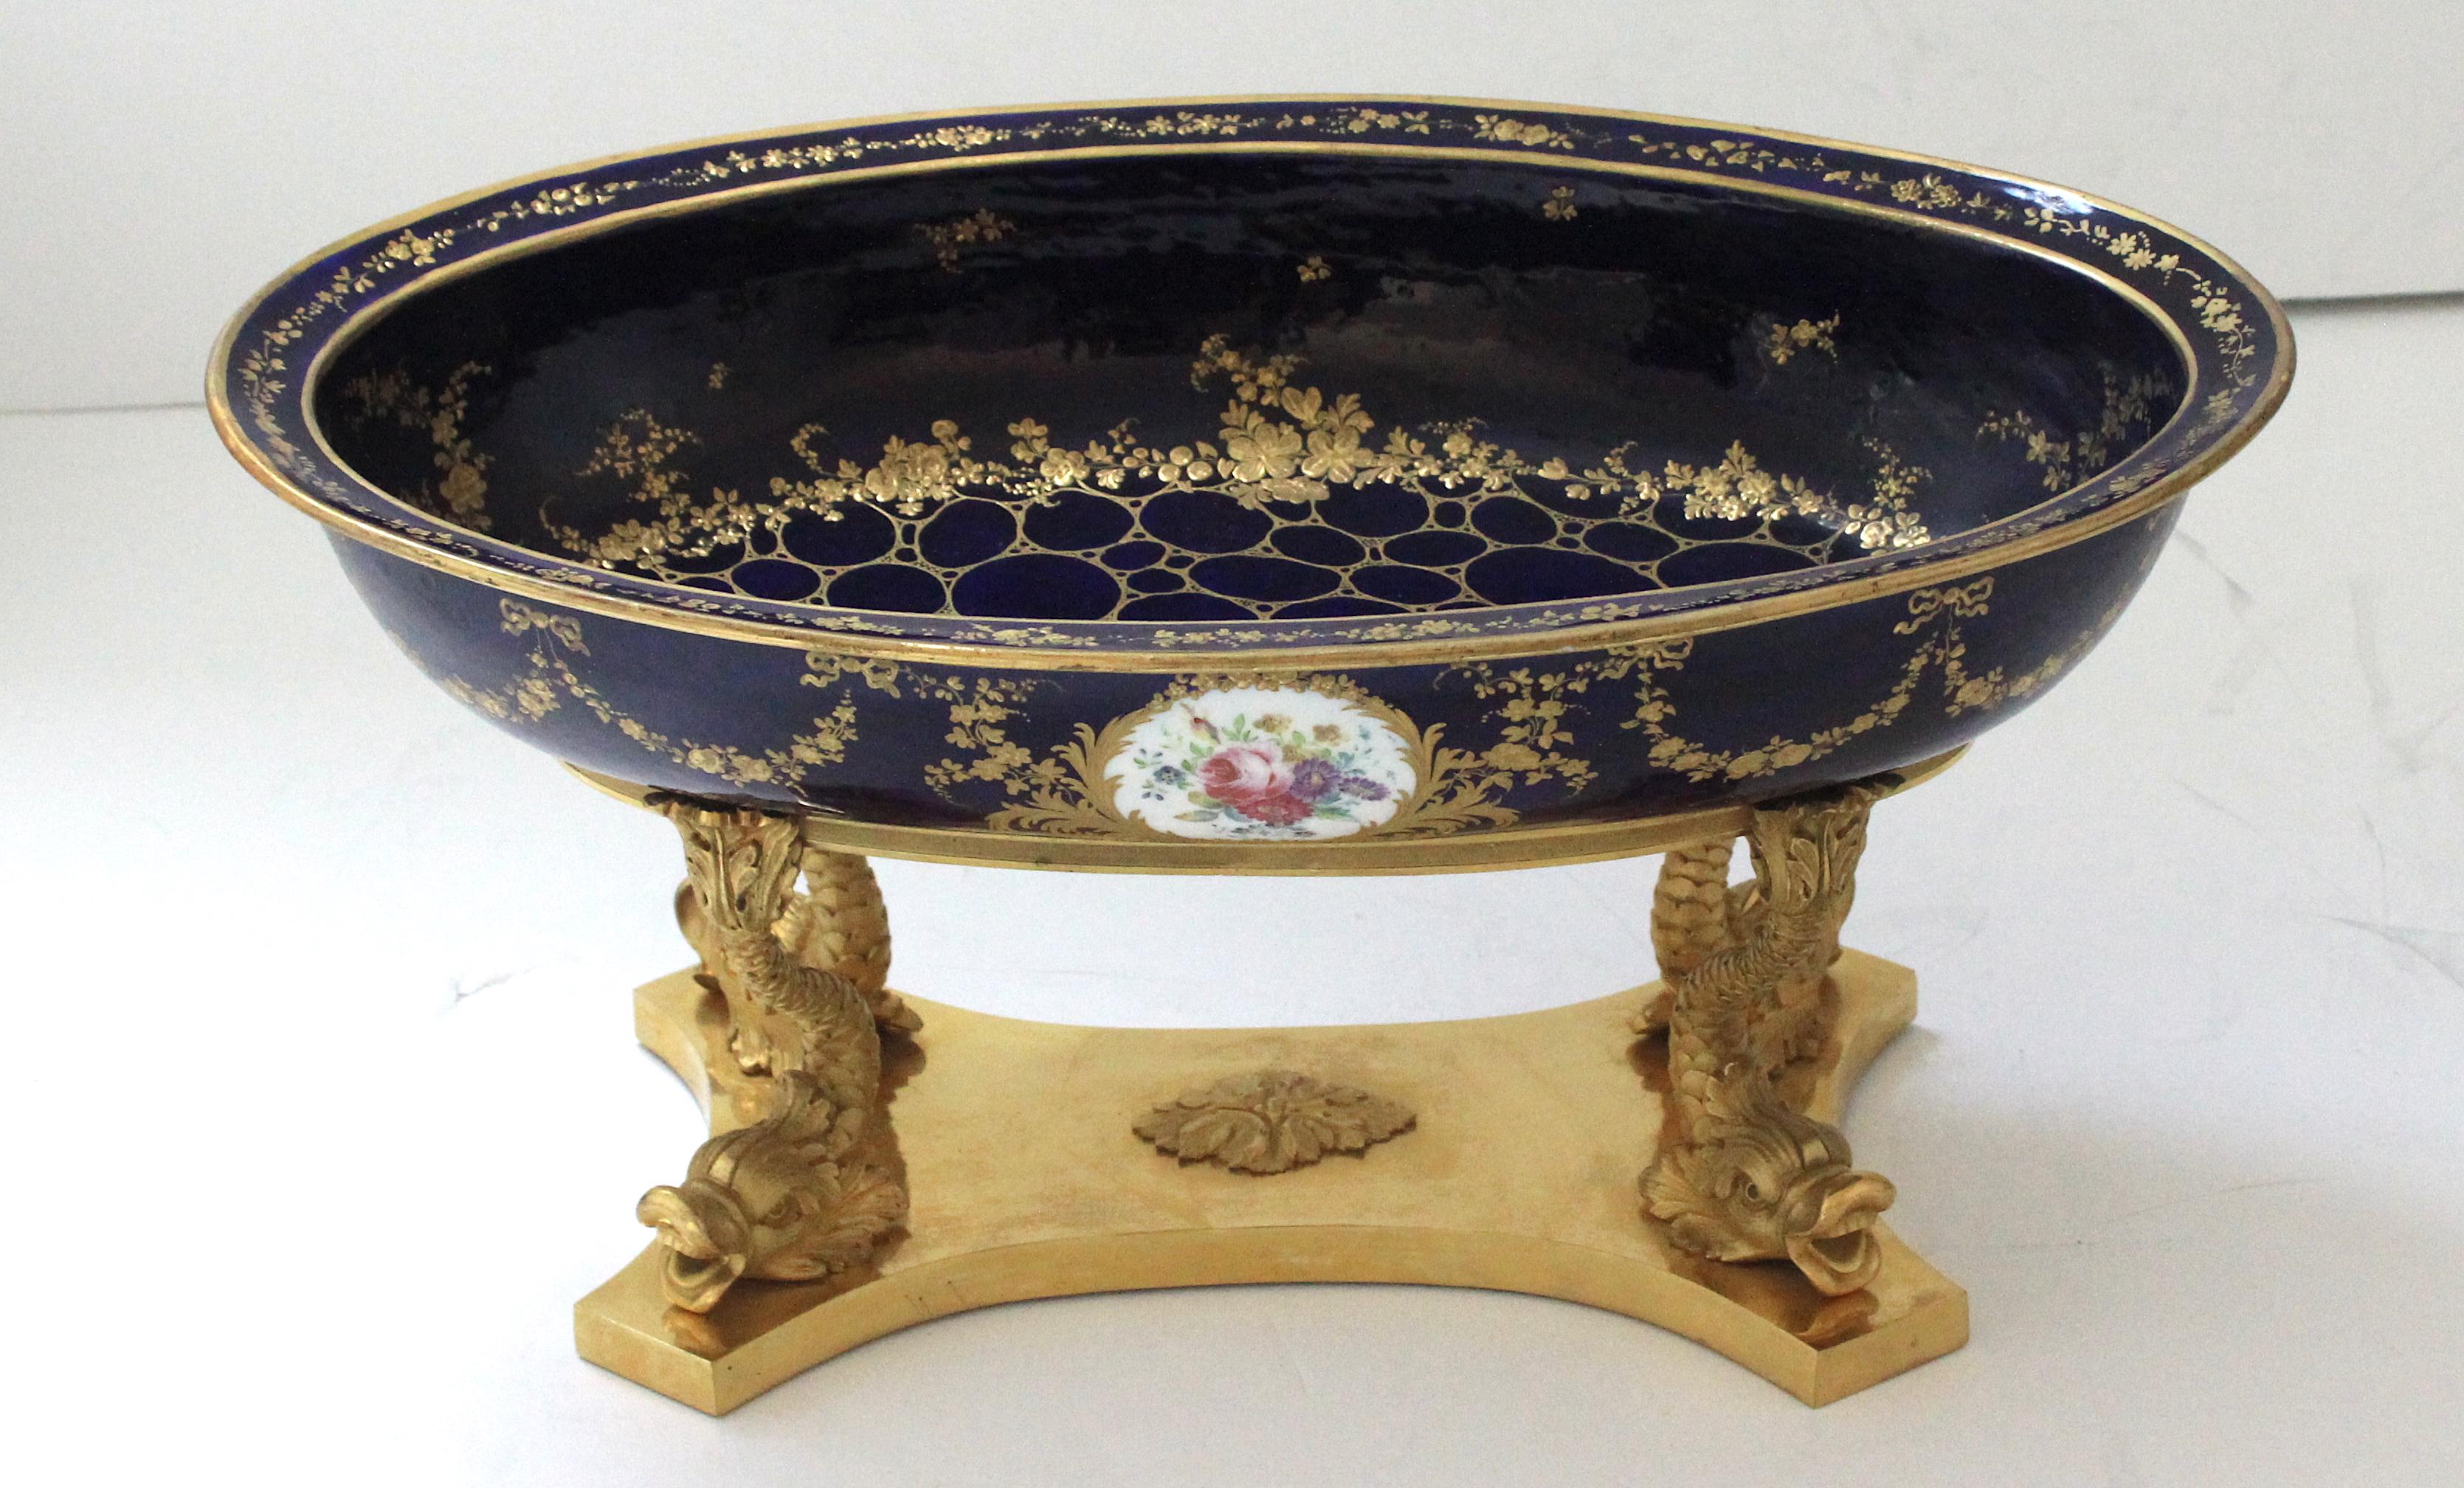 This piece is attributed to Severs the French porcelain maker, and the style, and form are from the 18th century. There is a Severs mark on the verso, but we could not authenticate thru our research. It all looks correct, but we are not the experts